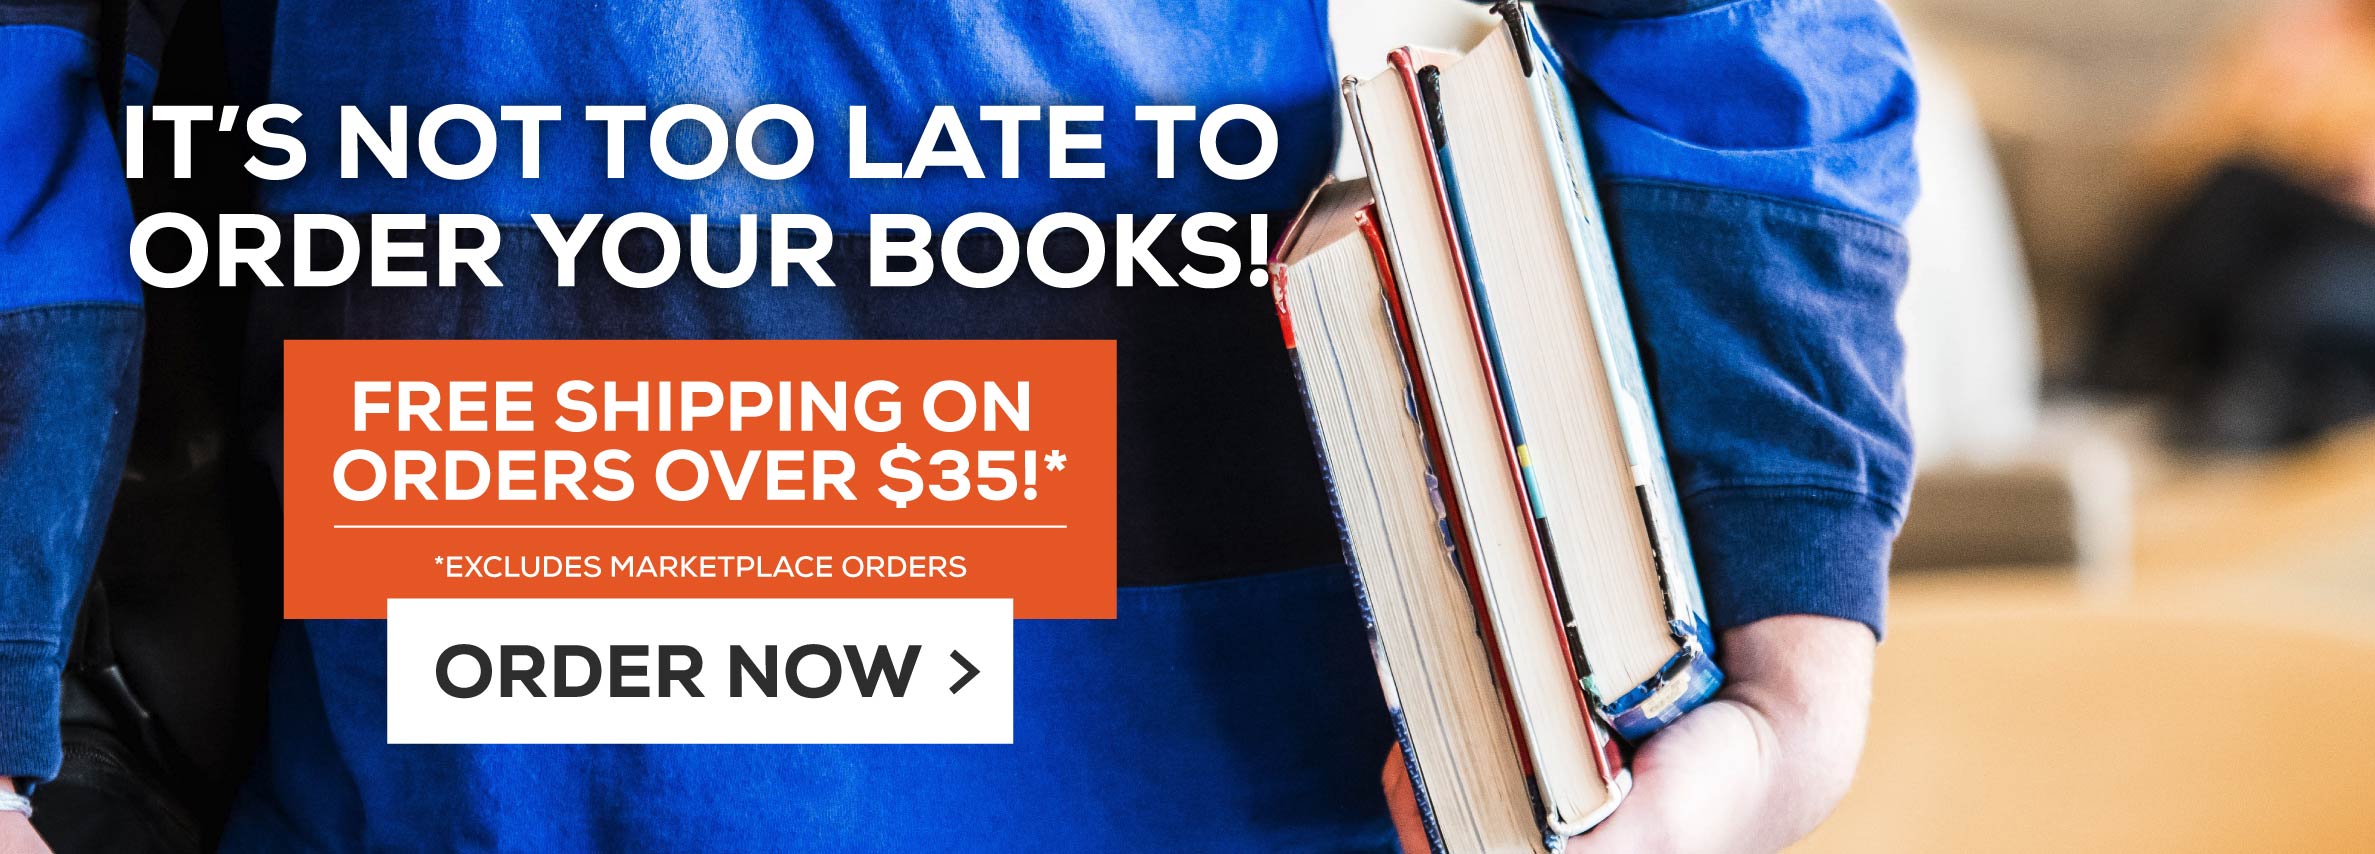 Itâ€™s not too late to order your books! Free shipping on all orders over $35!* Excludes marketplace purchases. Order Now.